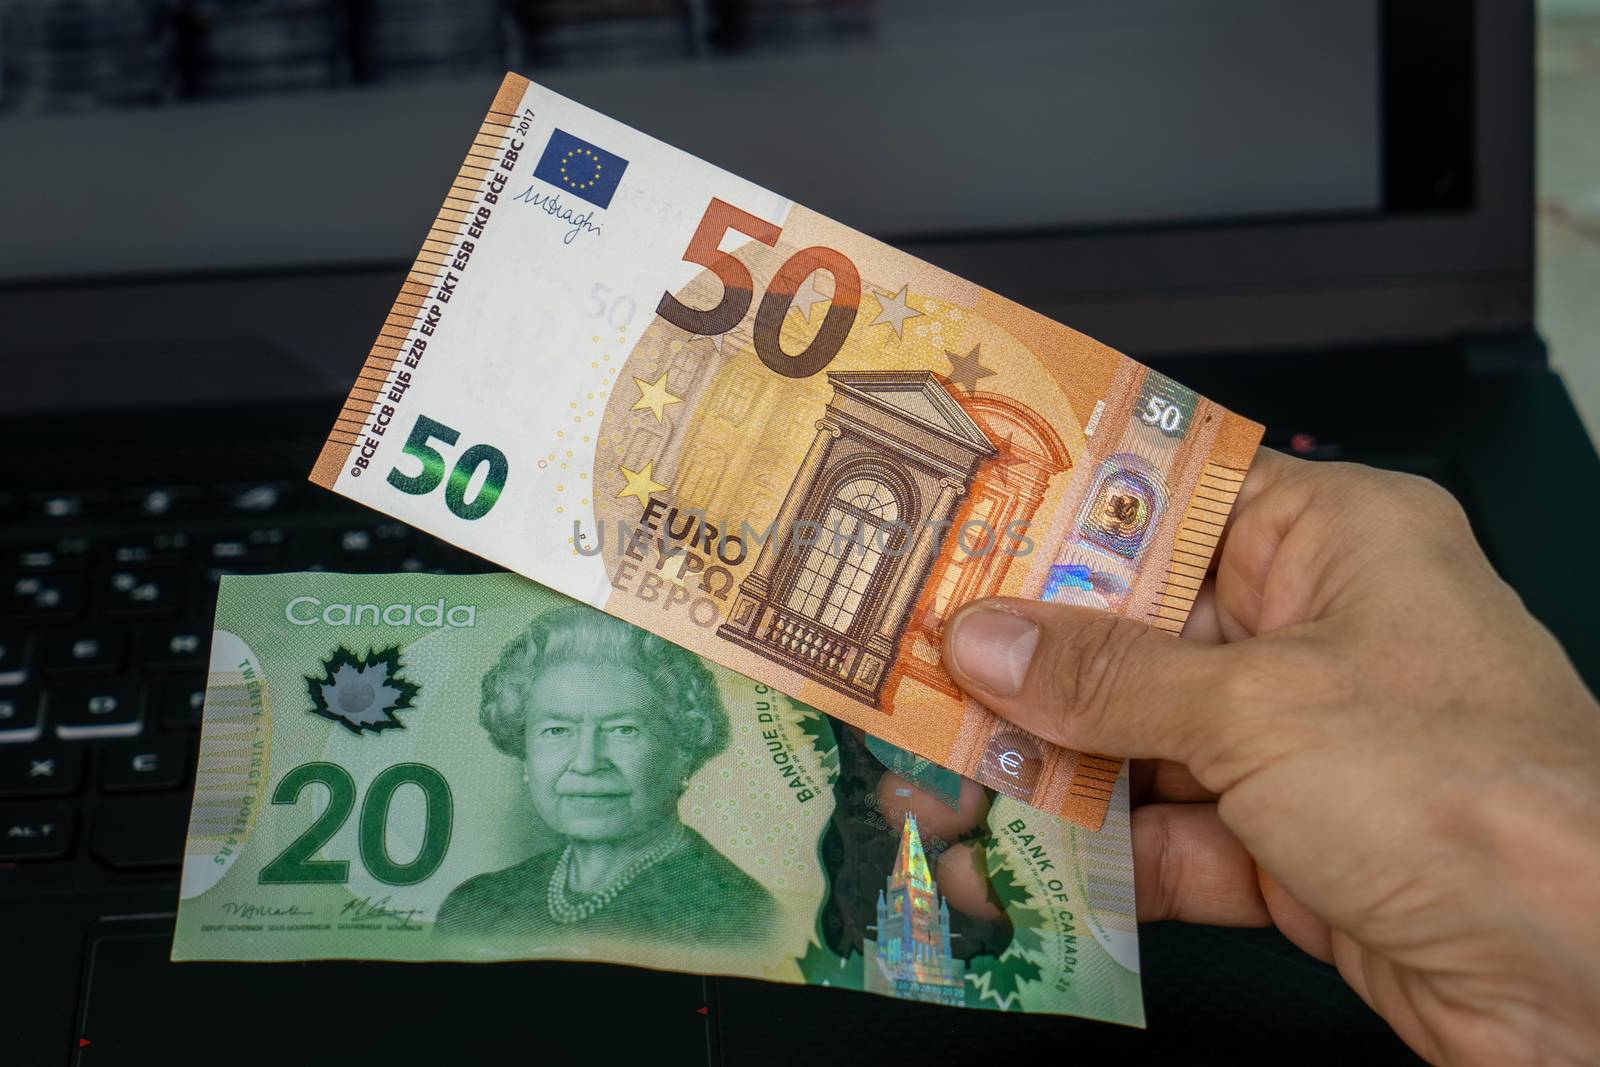 A hand holding two banknotes, one of twenty canadian dollars and the other of fifty euros